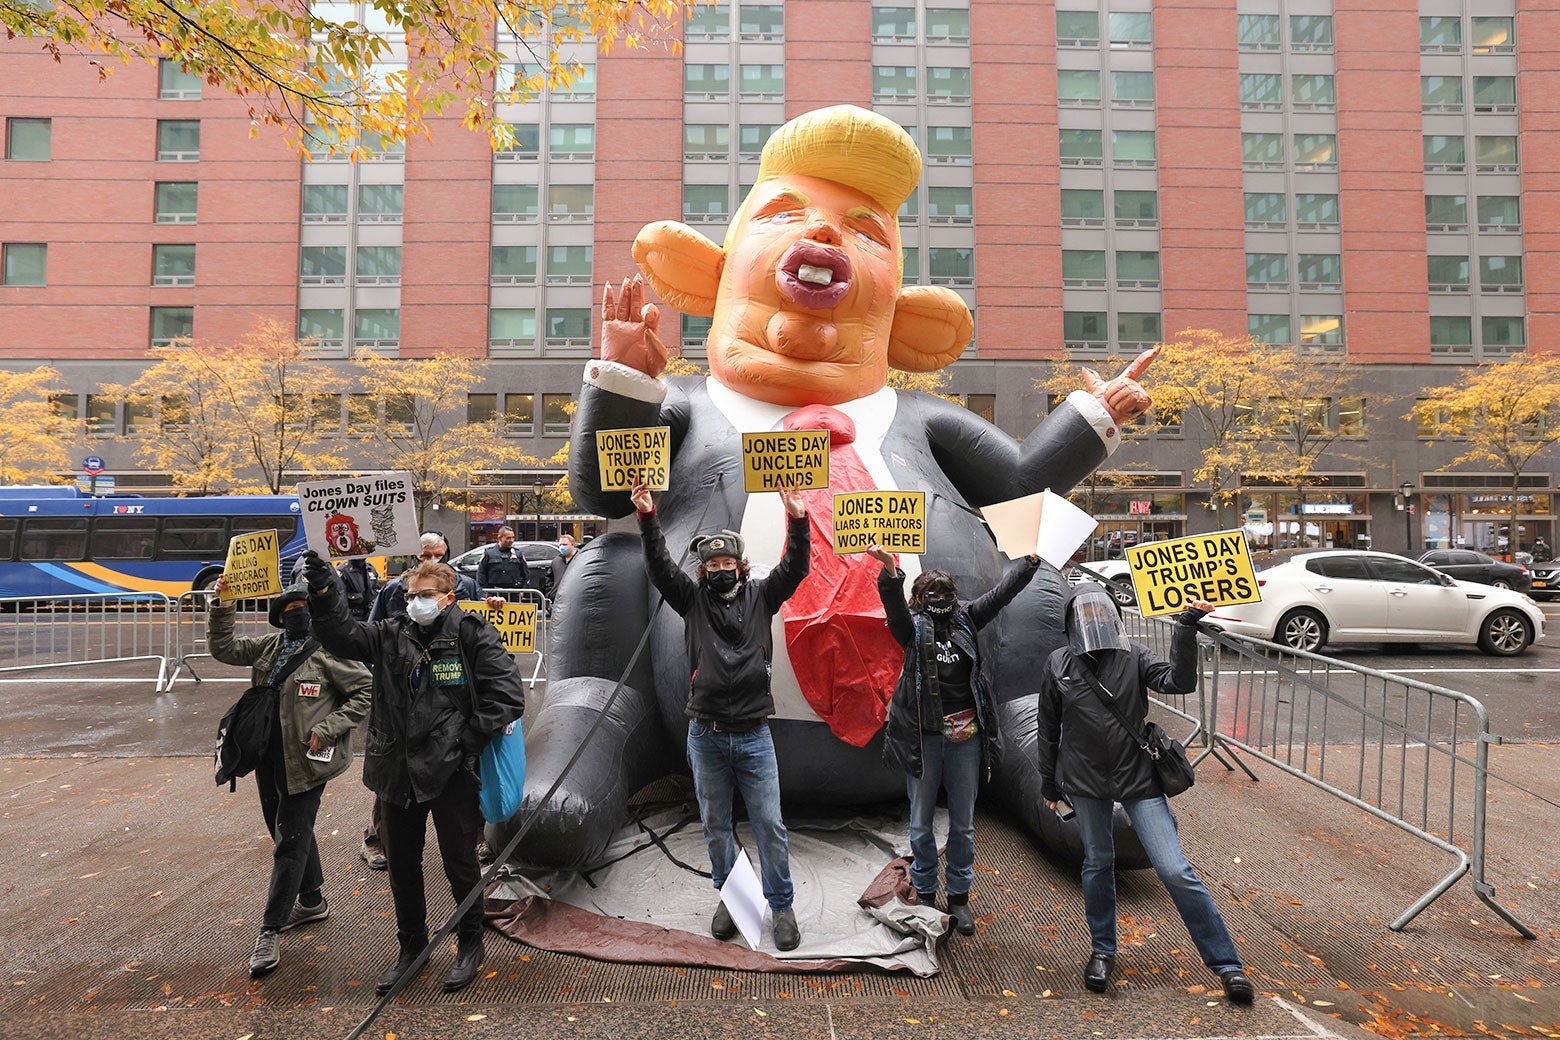 People hold up signs that say, "Jones Day Trump's Losers" in front of a large inflatable rat that looks like Donald Trump.